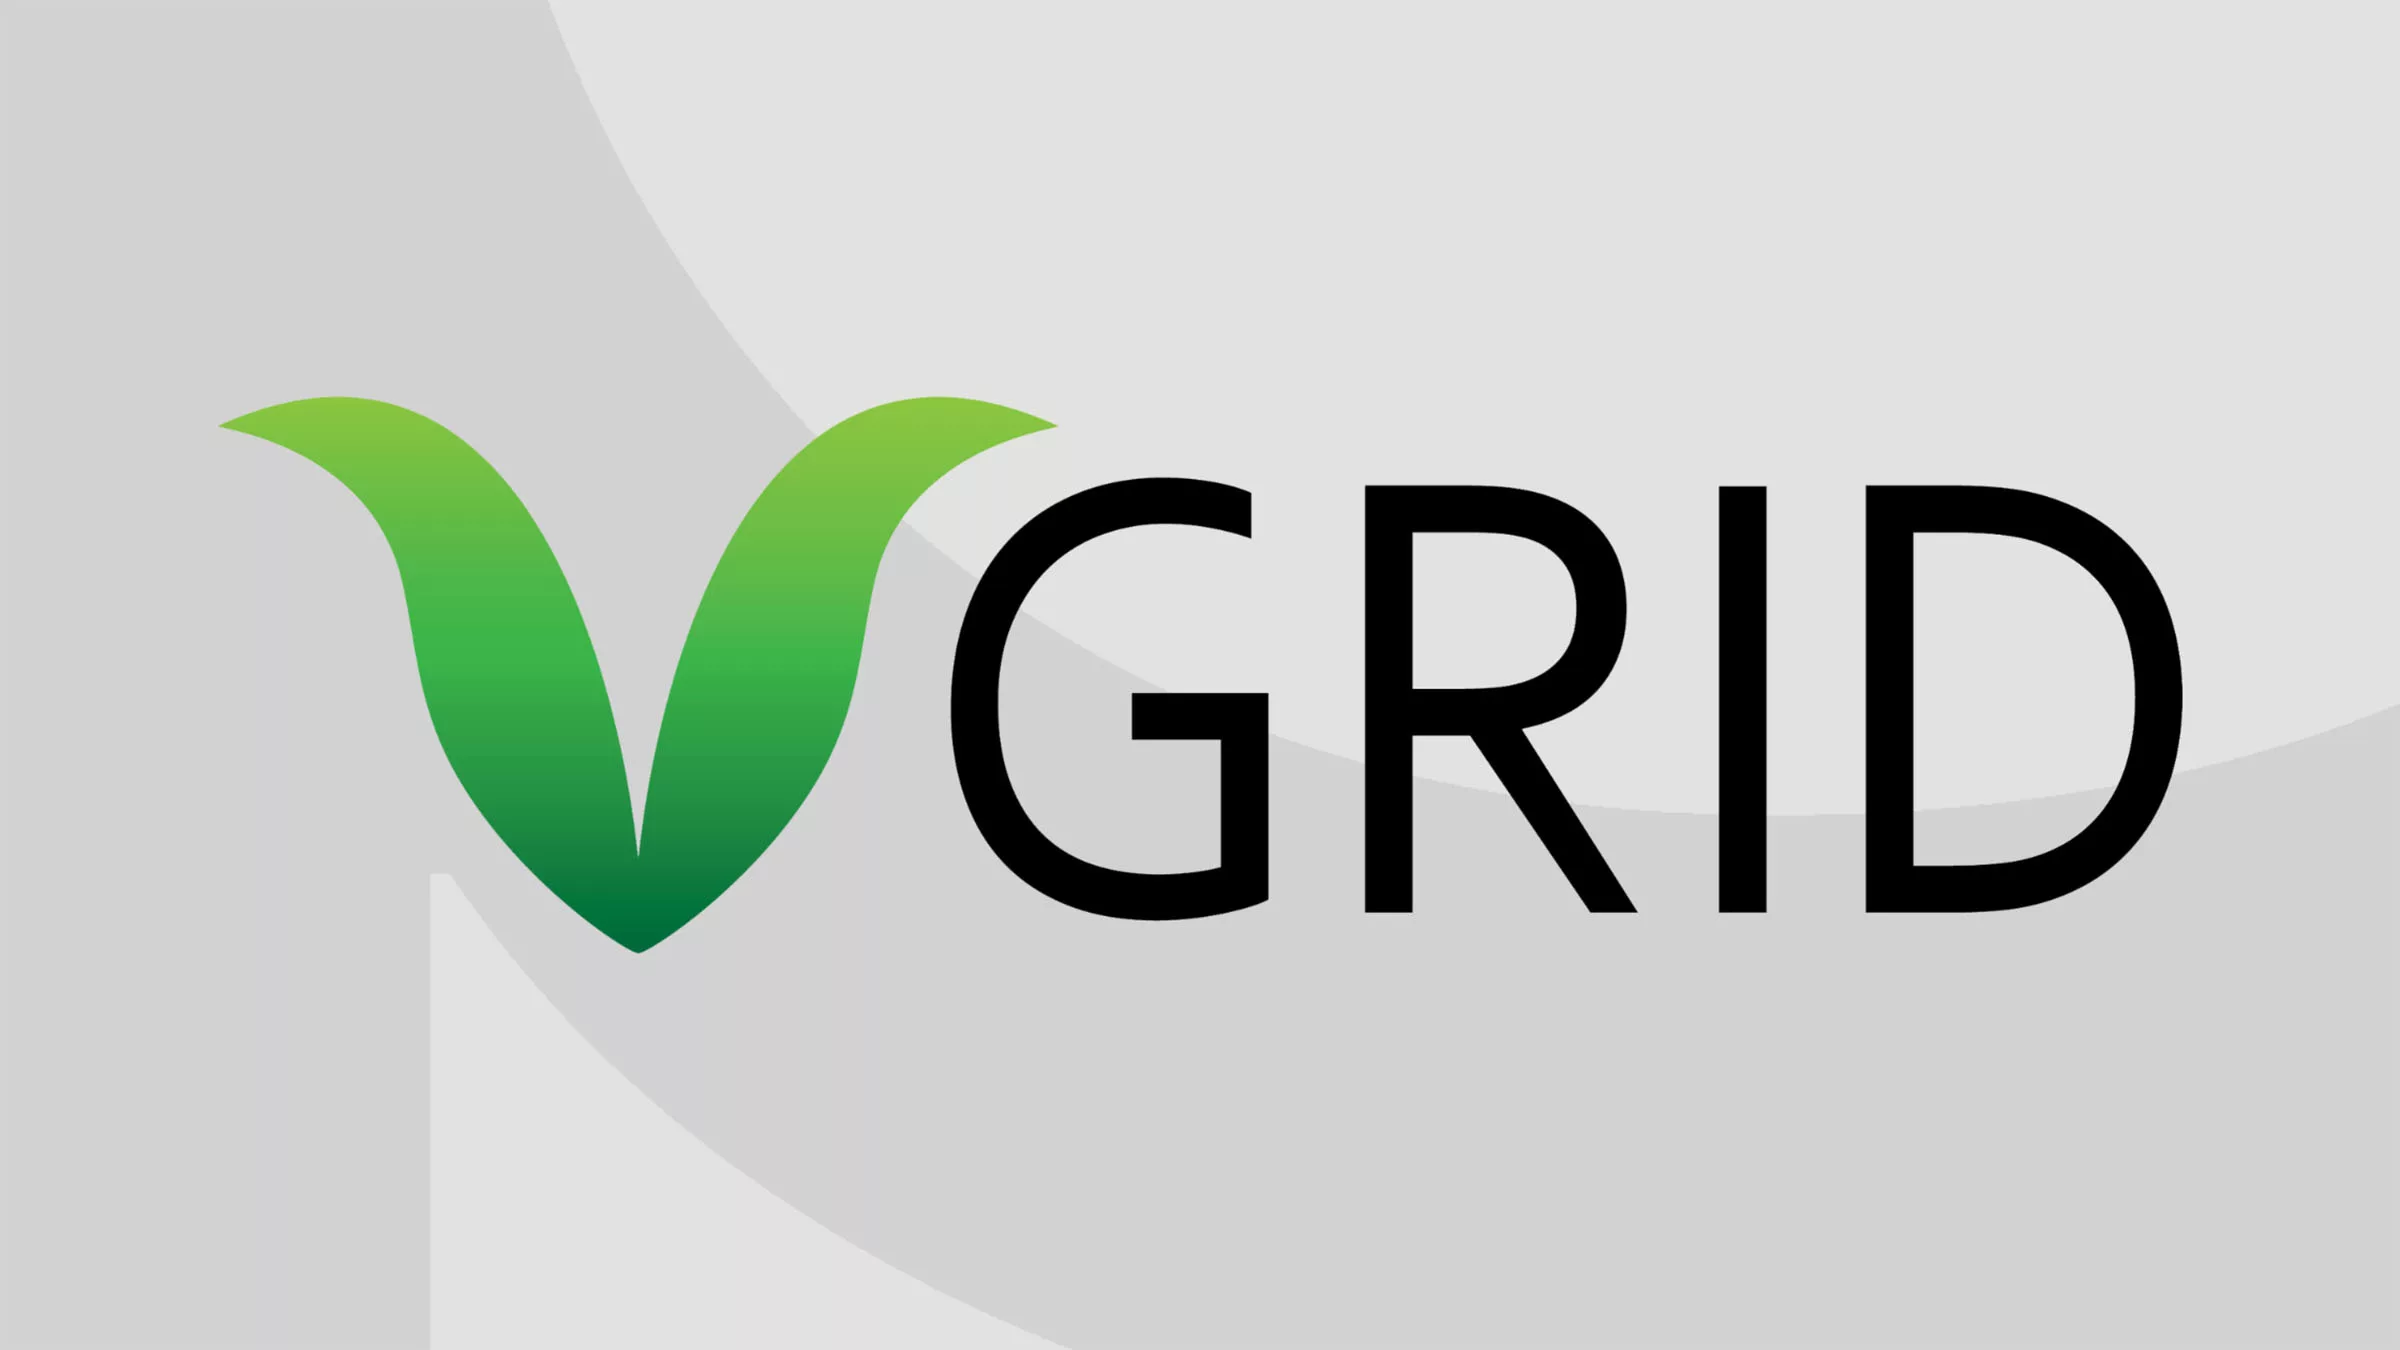 Green checkmark logo with the text 'V GRID' on a gray gradient background.